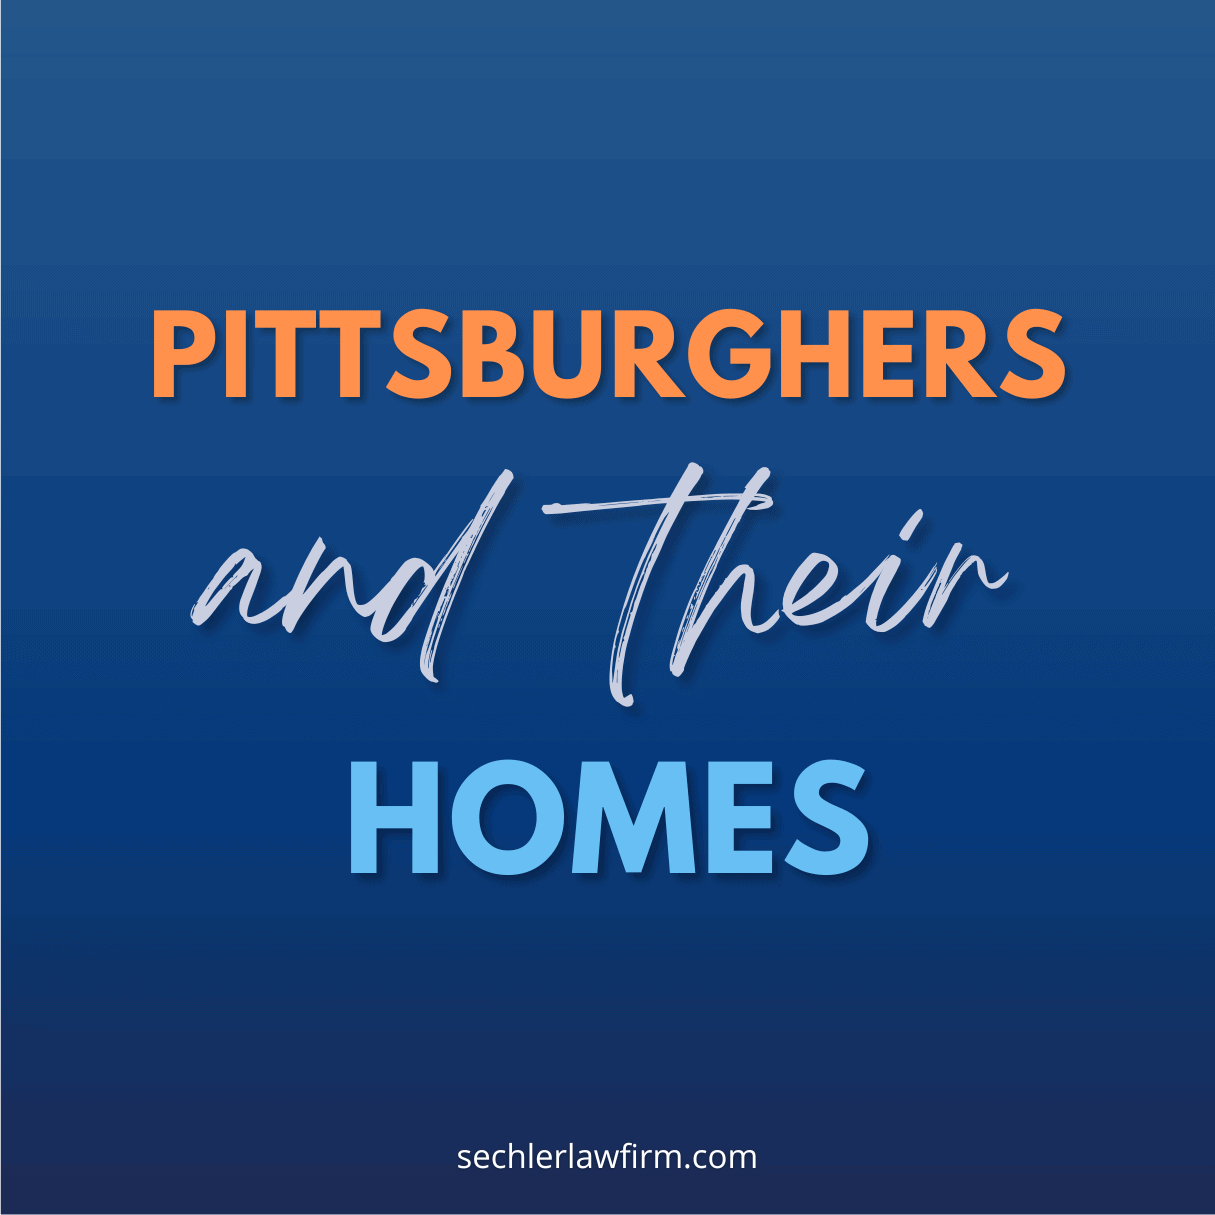 Pittsburghers and Their Homes